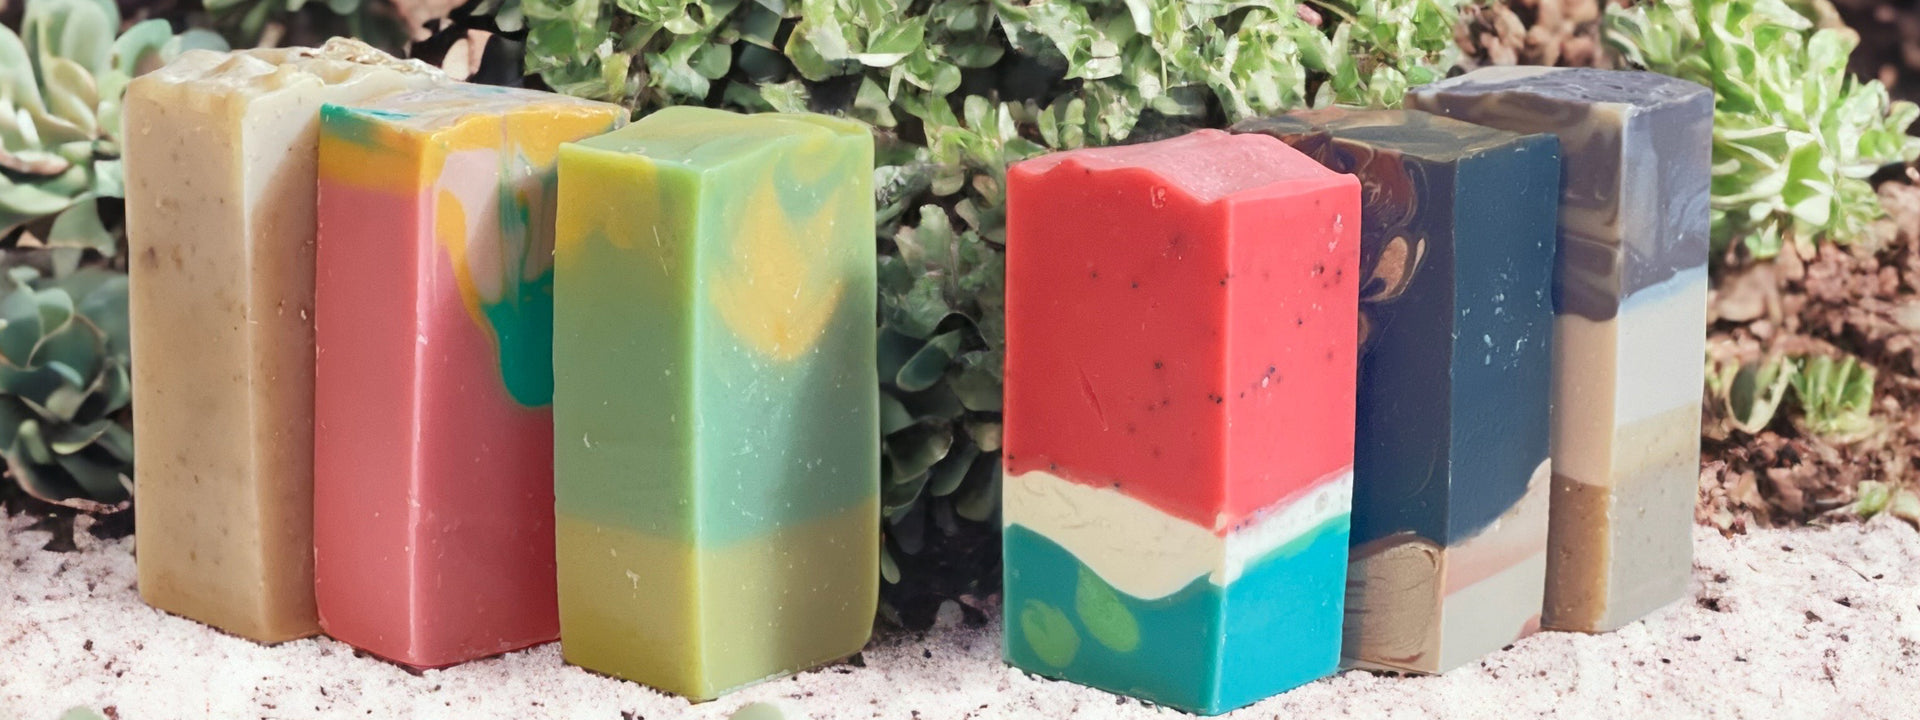 Image showcasing the Pure Indulgence Soap Collection, featuring a variety of artisanal soaps including Unscented Oatmeal Milk and Honey, Island Sunrise, Lemongrass, Watermelon, Treasured Charcoal, and Scented Oatmeal Milk and Honey.